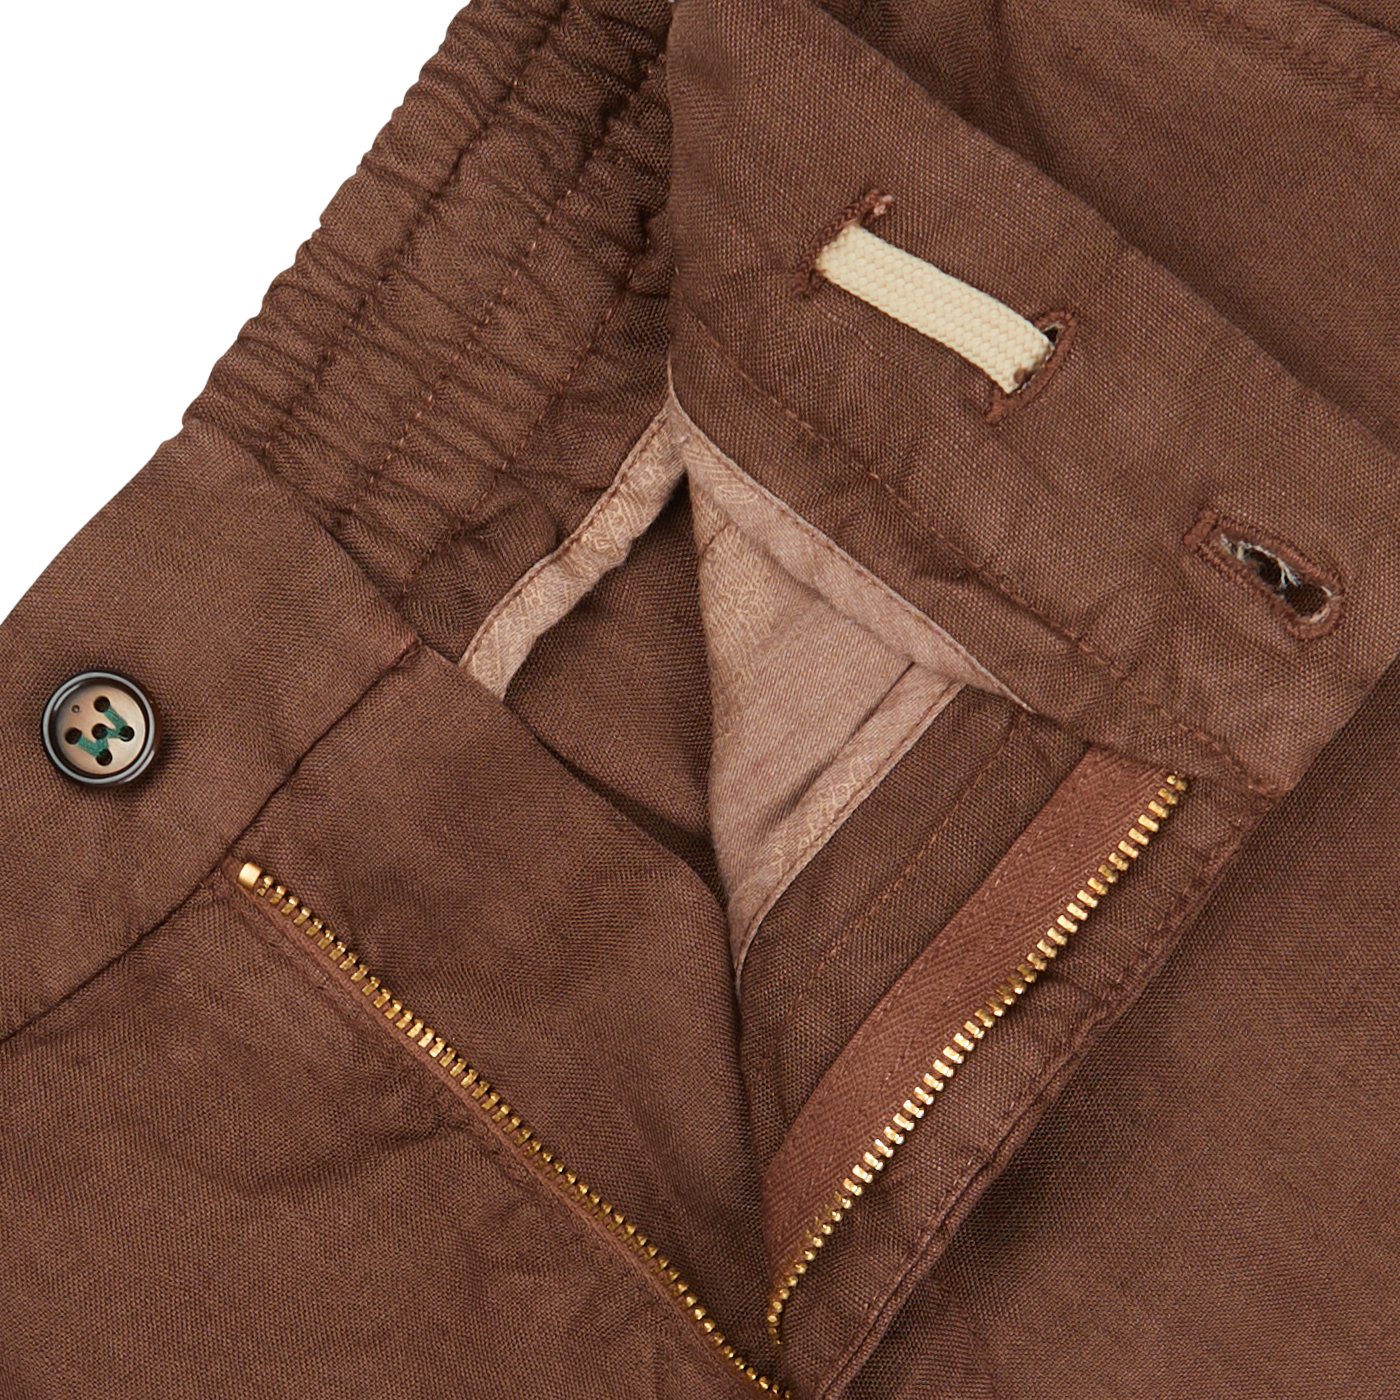 Close-up of a Berwich terra brown washed linen drawstring shorts with a zipper, button, and pocket details on a light background.